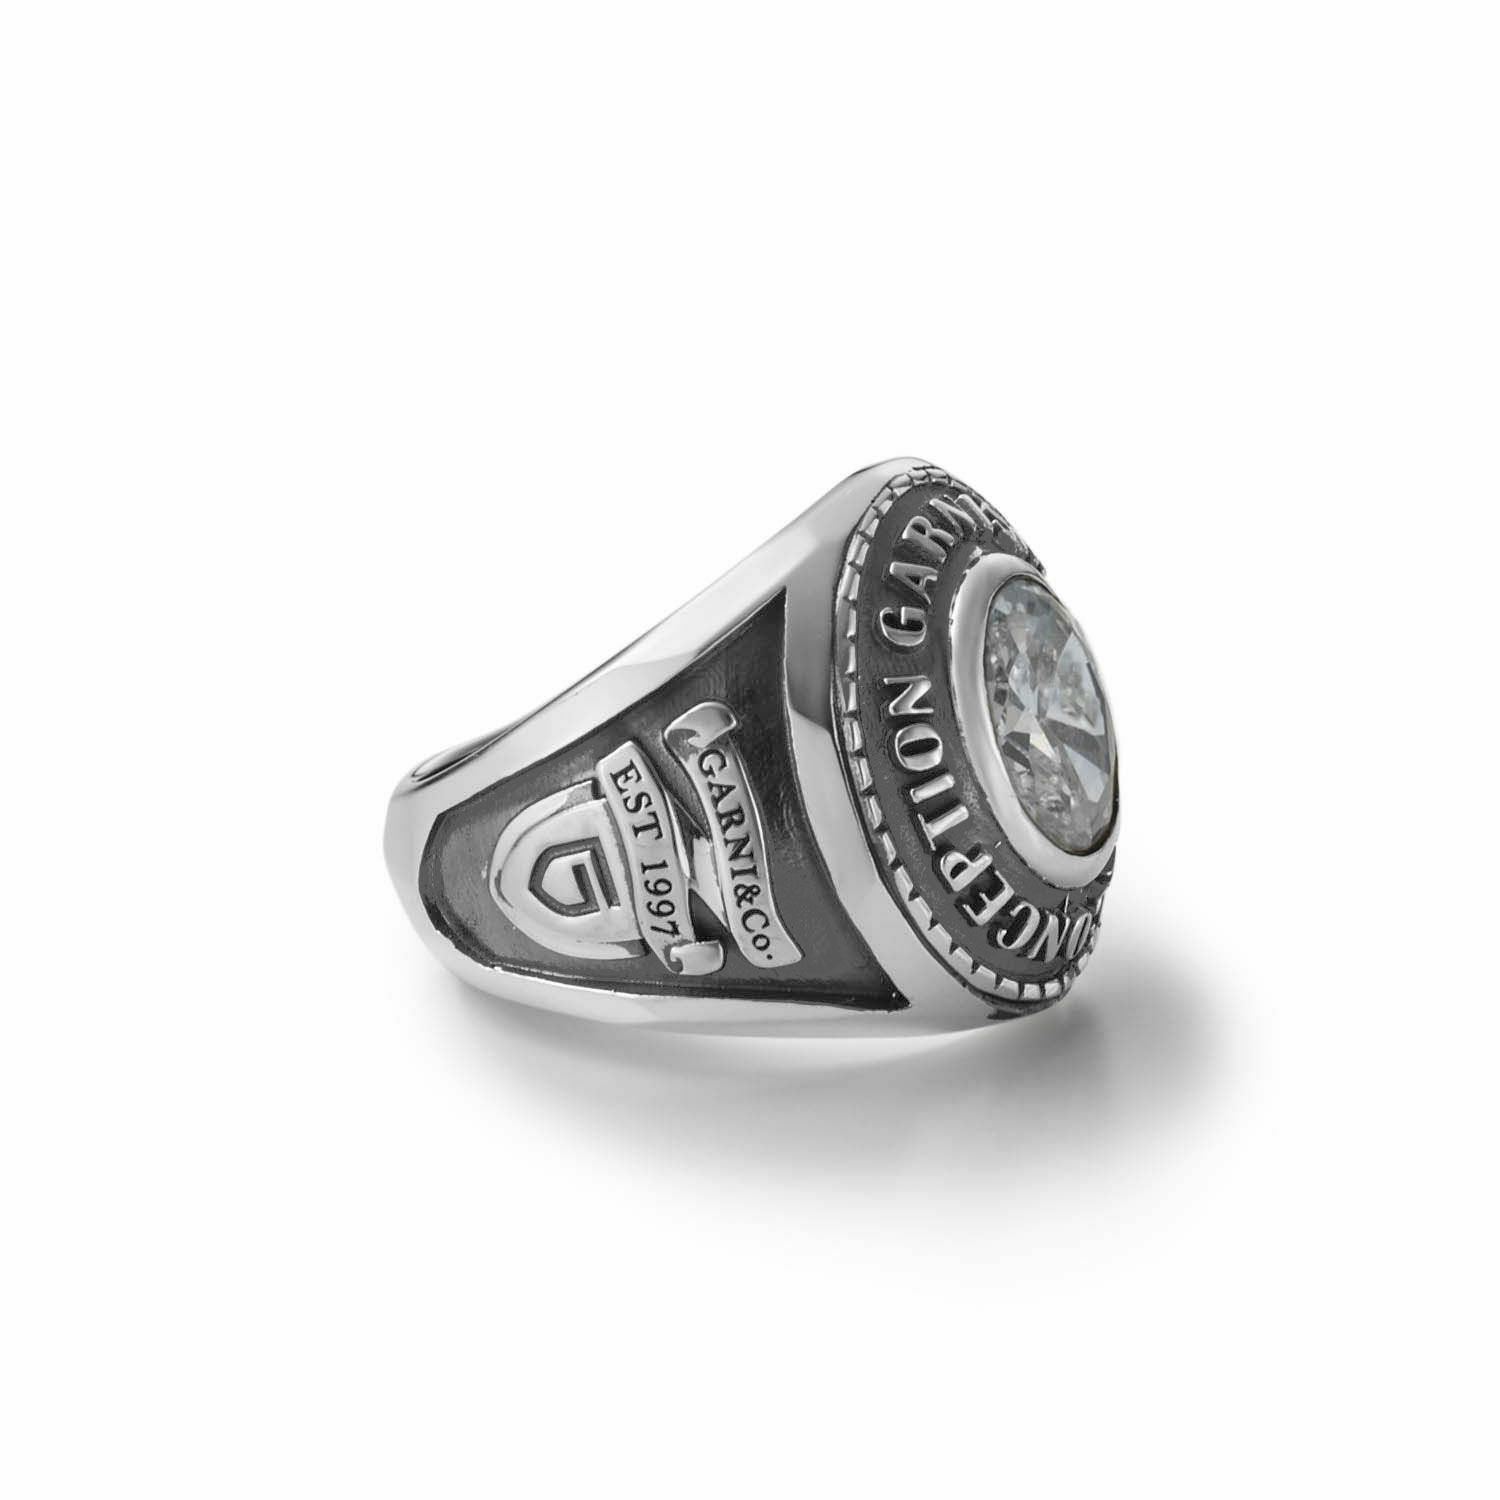 Ism College Ring - L - CLEAR | GARNI ONLINE STORE | ガルニ【公式通販】